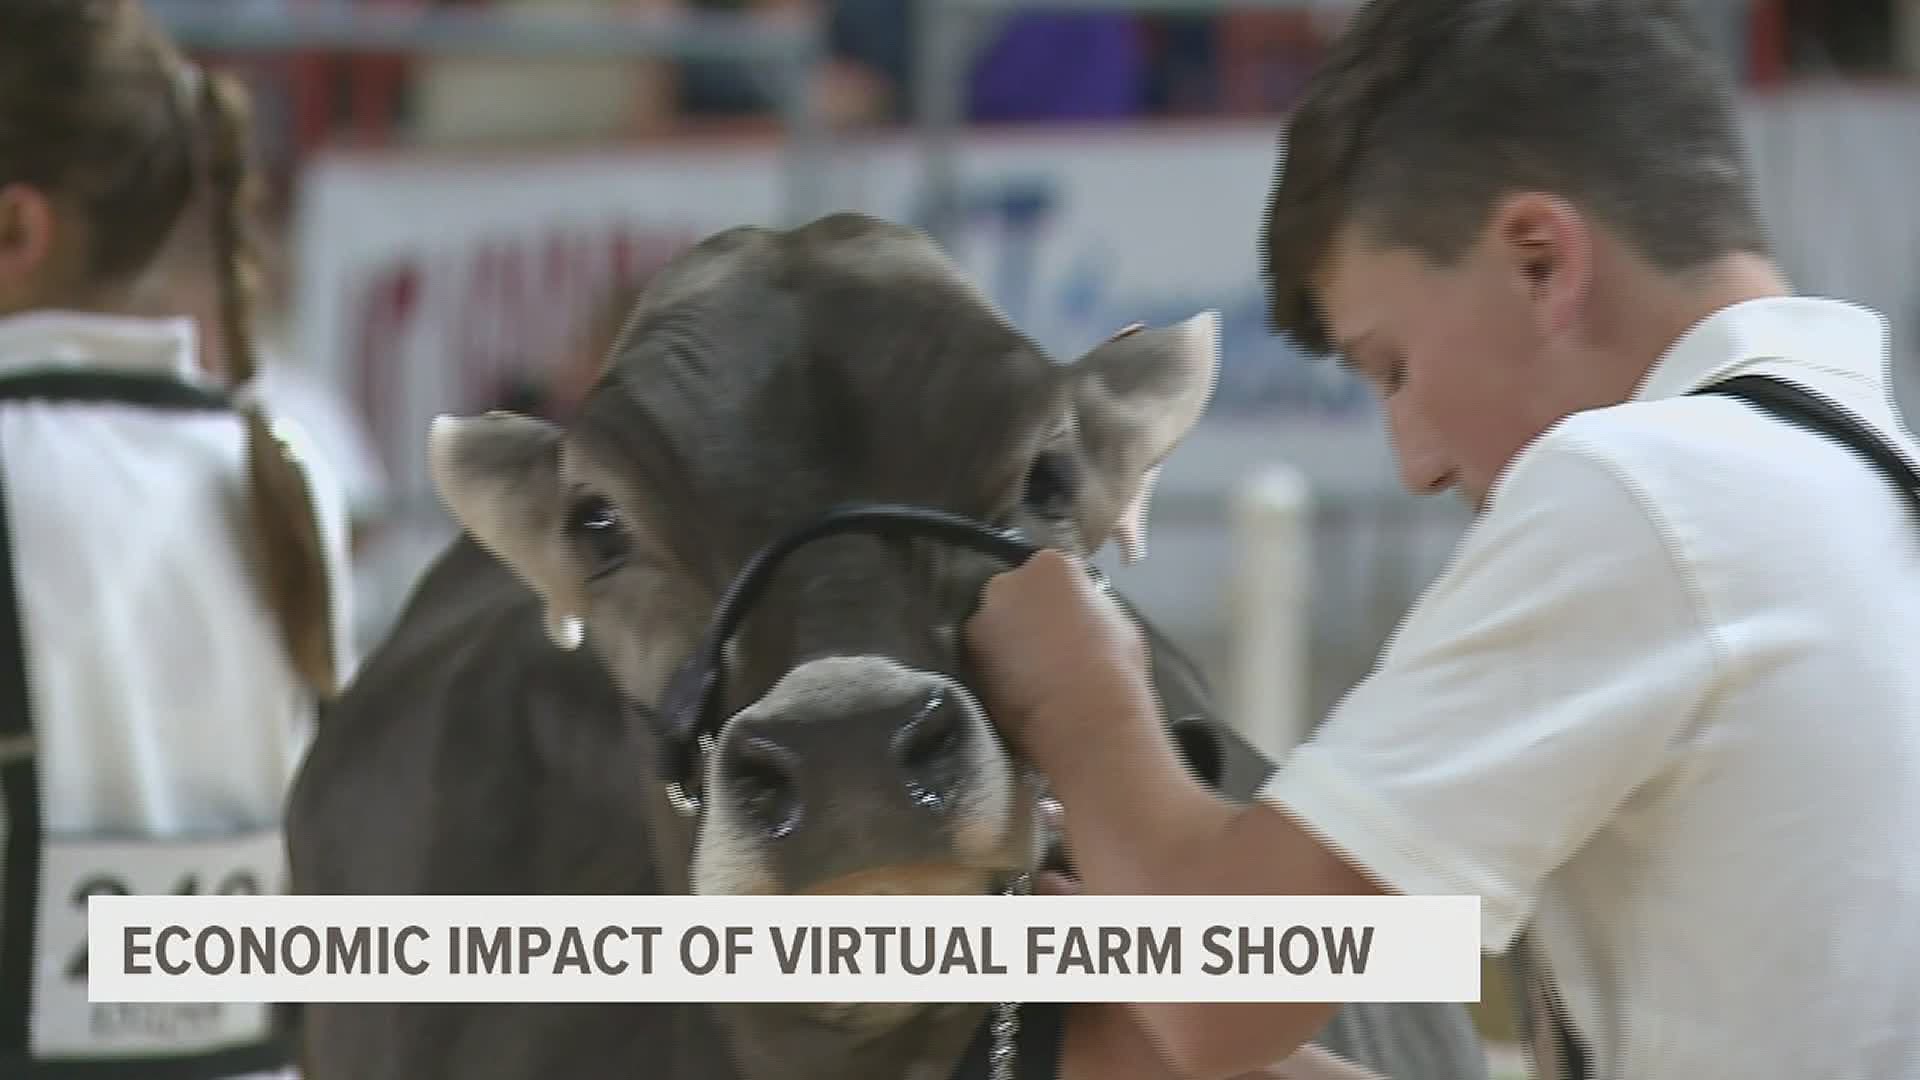 Because the 2021 Pennsylvania Farm Show has gone virtual, its outsized economic impact will likely be dampened this year.